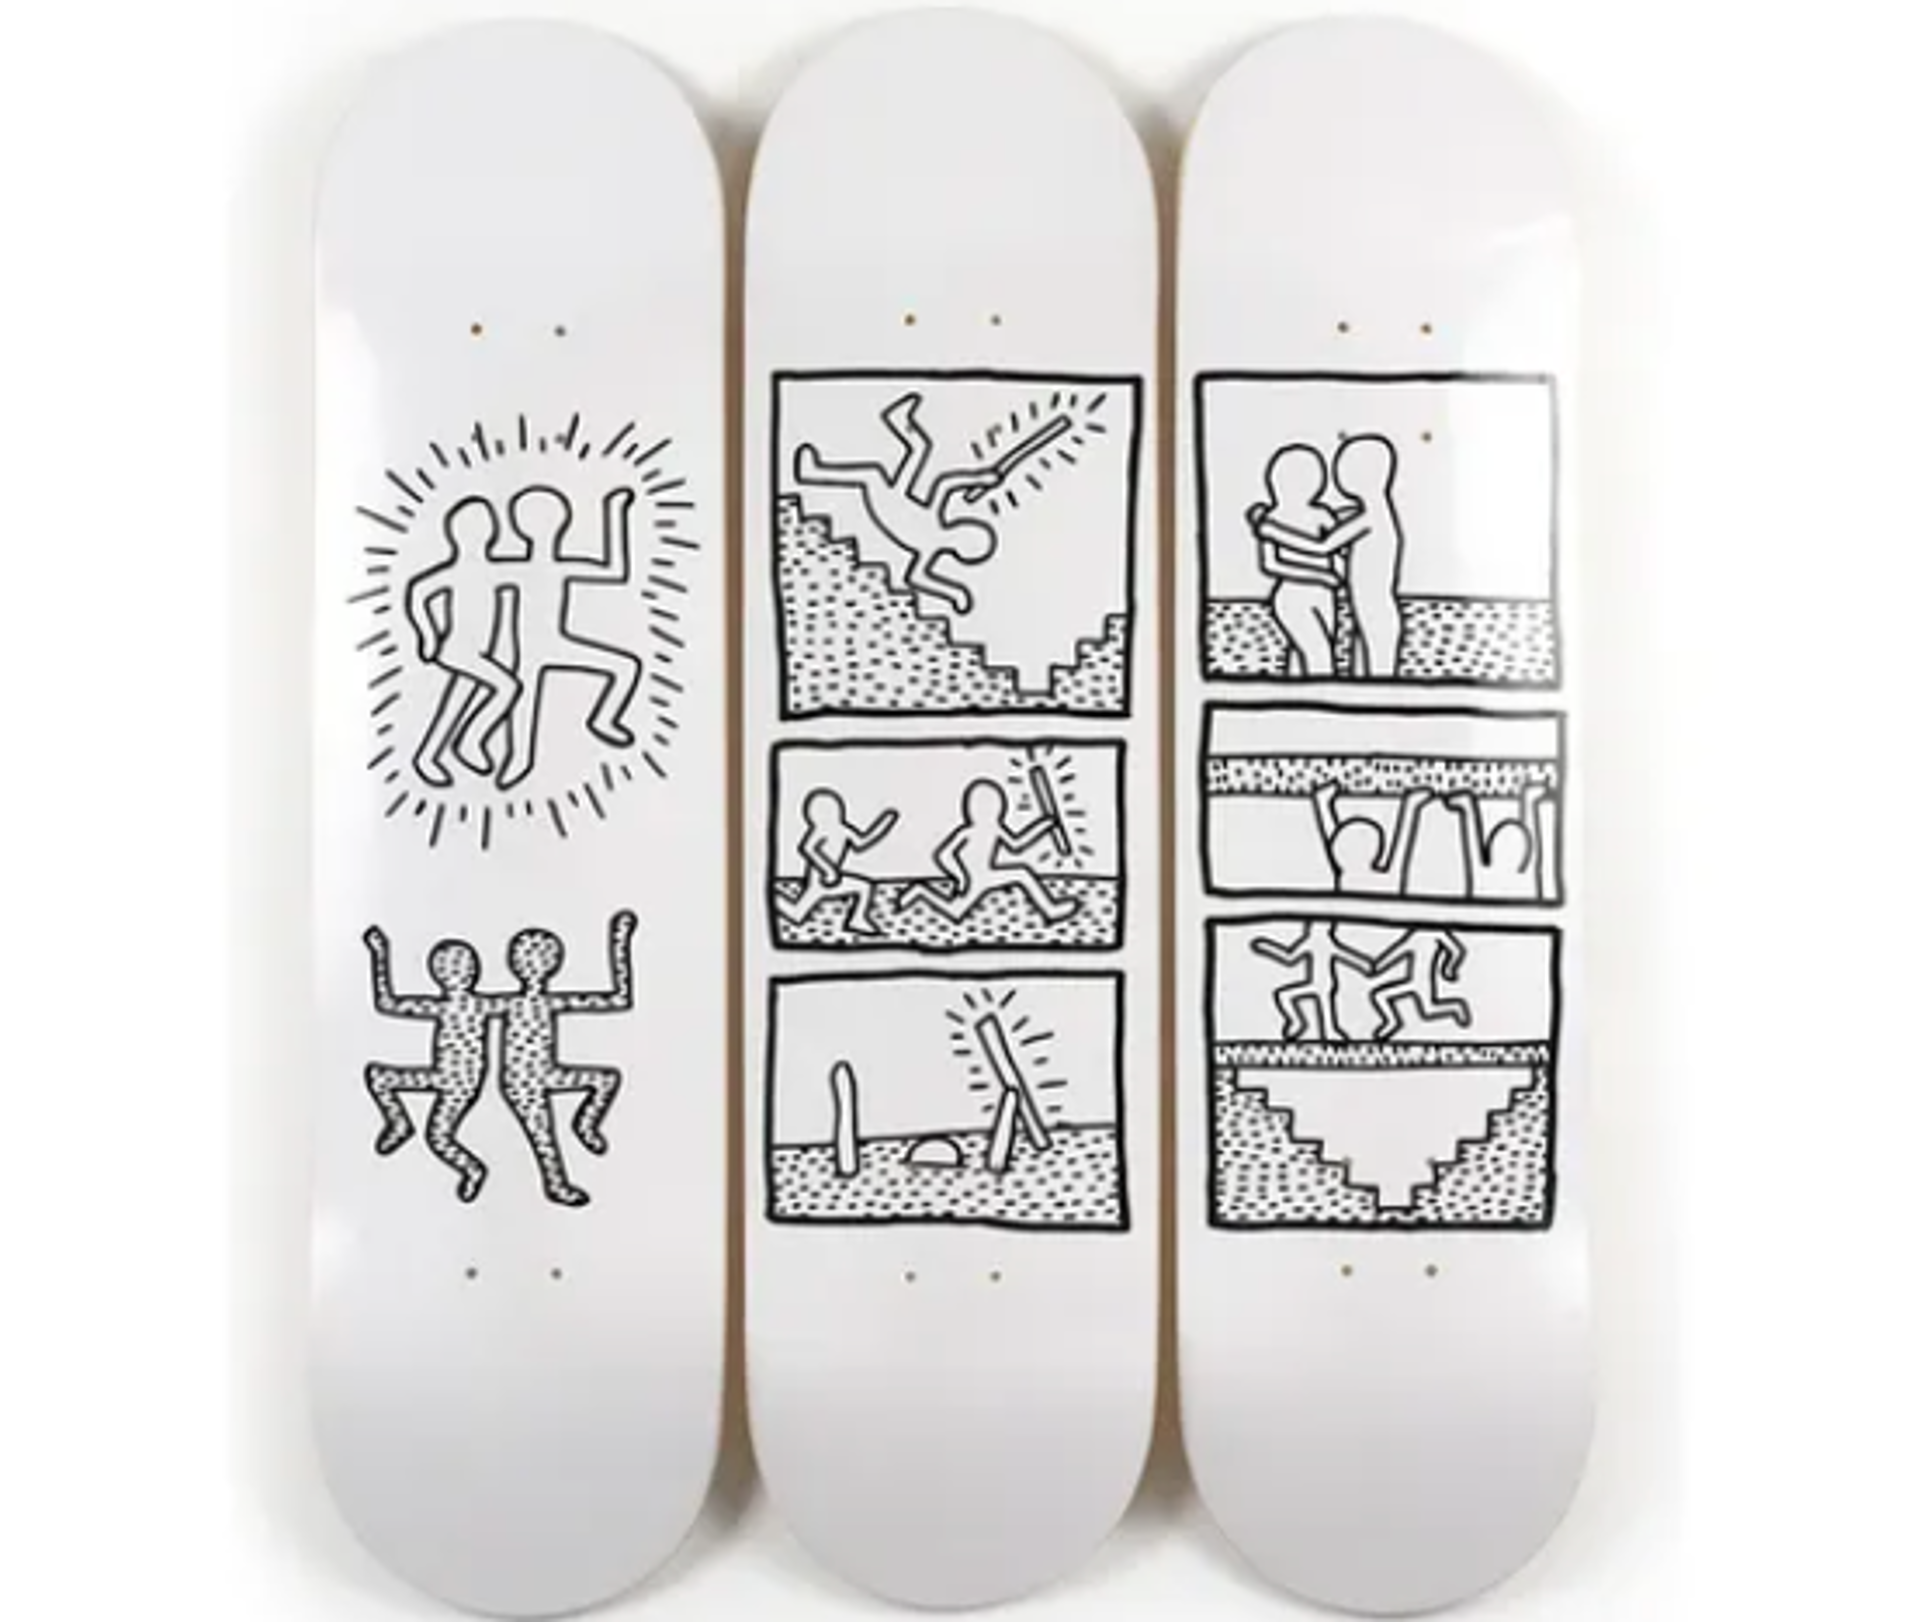 UNTITLED / Skateboard  (Triptych) by Keith Haring